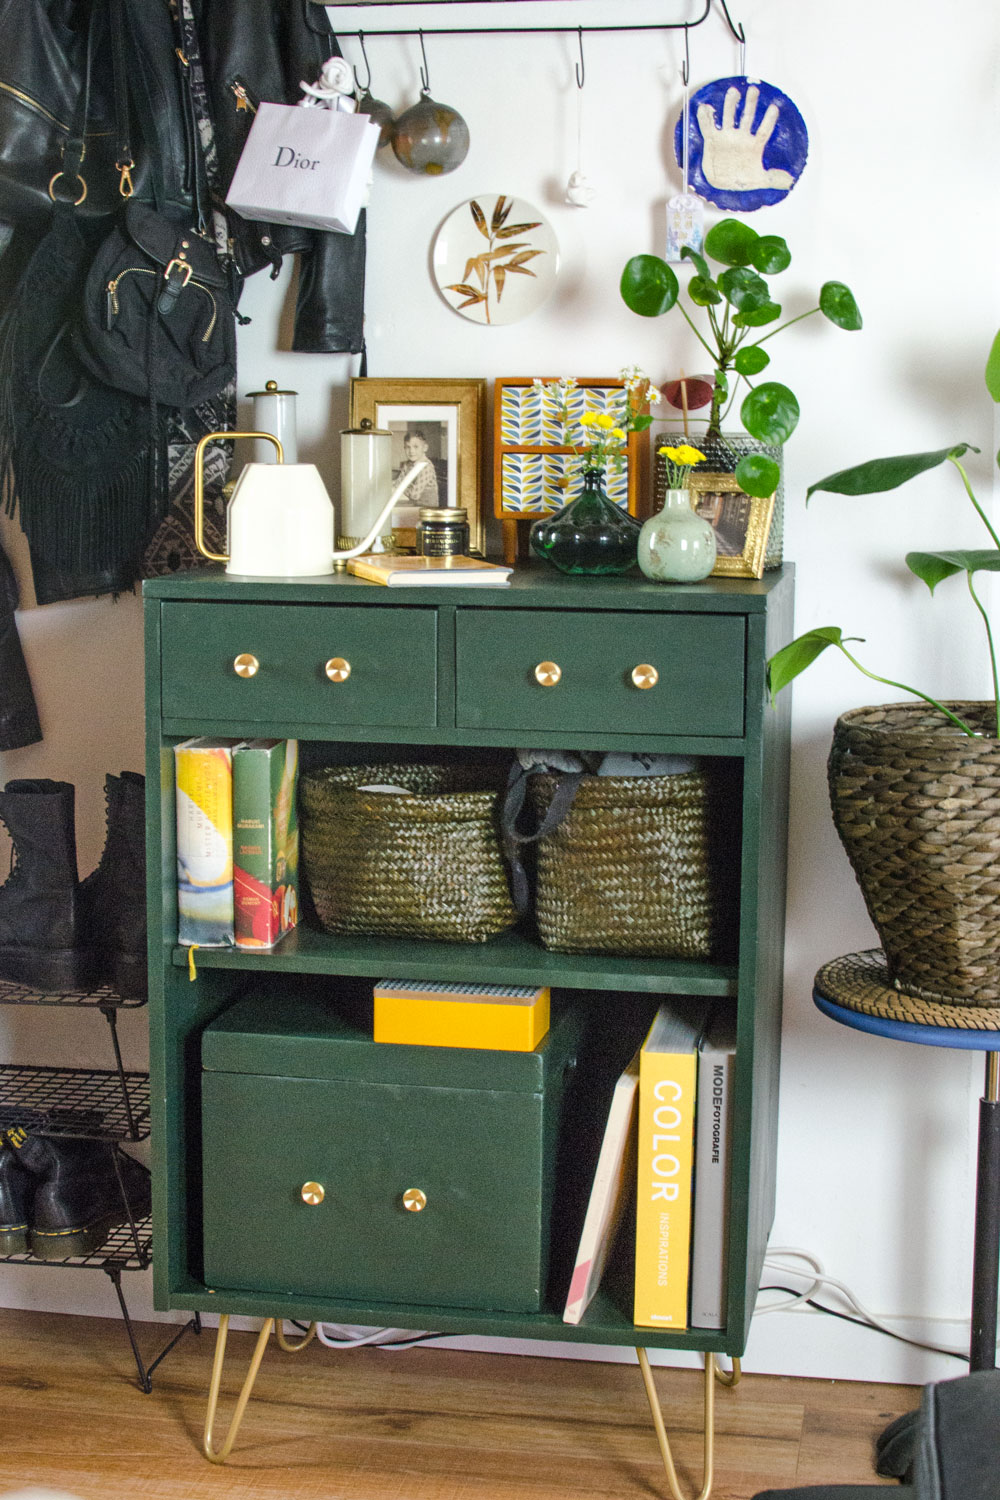 DIY UPCYCLING MID-CENTURY HIGHBOARD DIY mit Remmers [eco]| (anzeige)